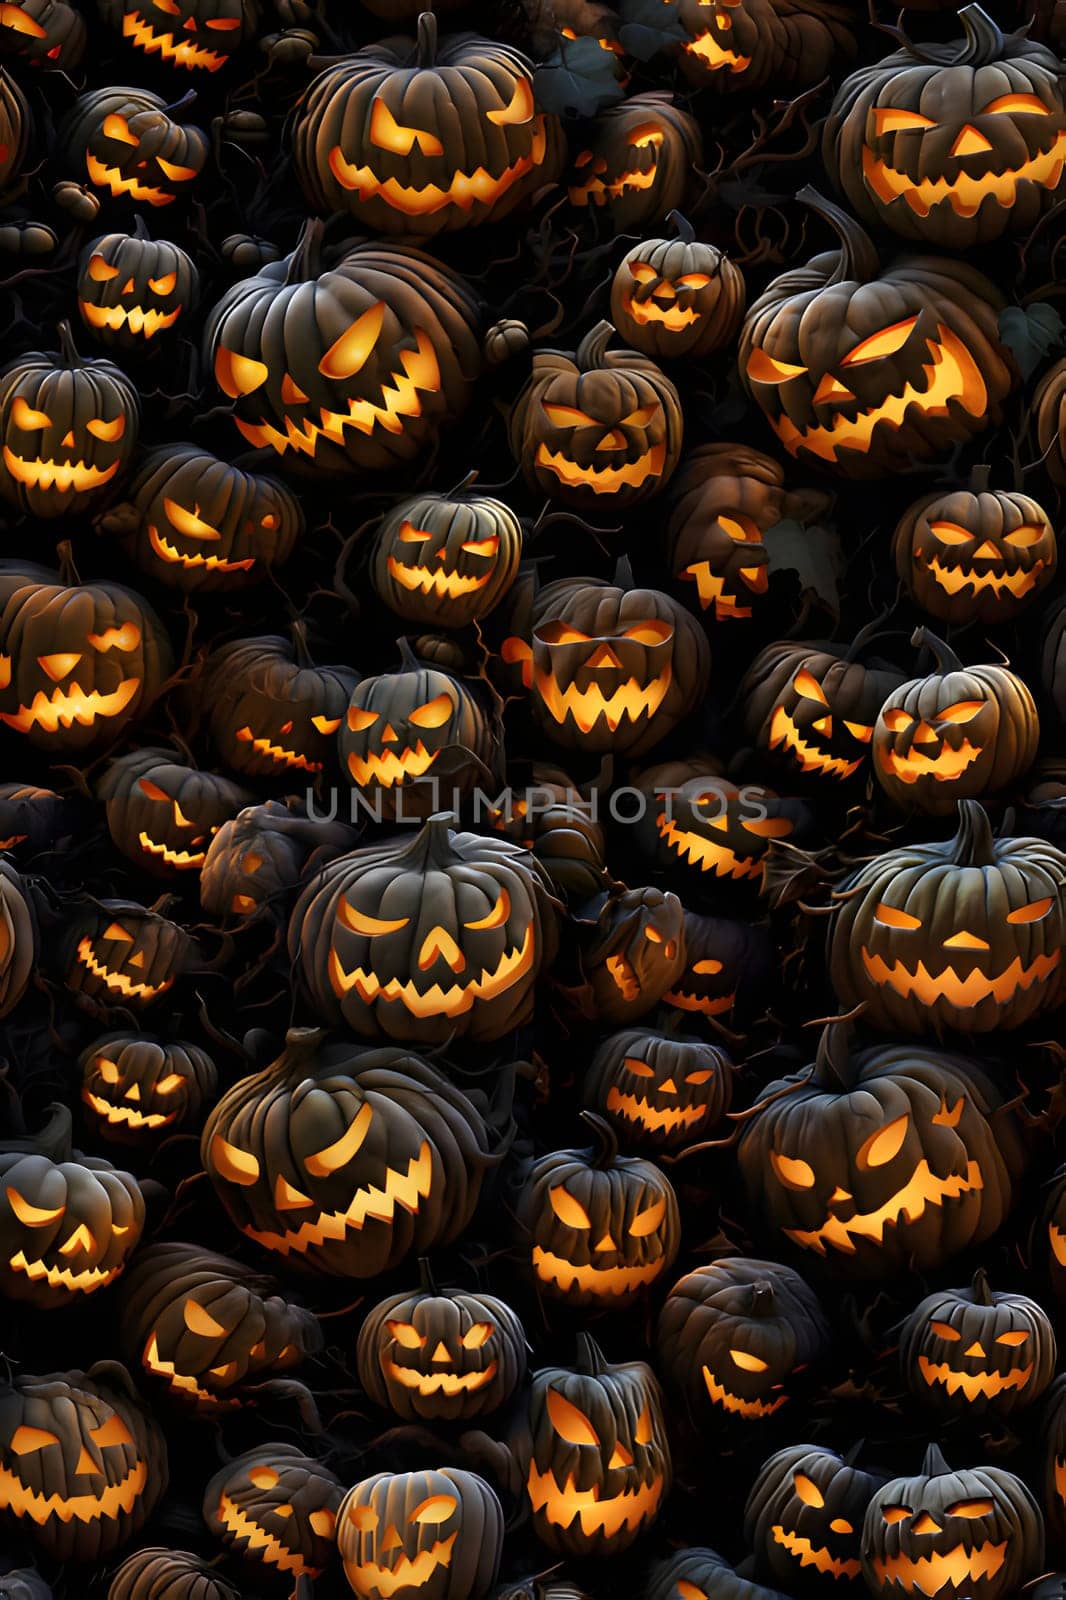 Luminously eyes jack-o-lantern pumpkins as abstract background, wallpaper, banner, texture design with pattern - vector. Black colors. by ThemesS